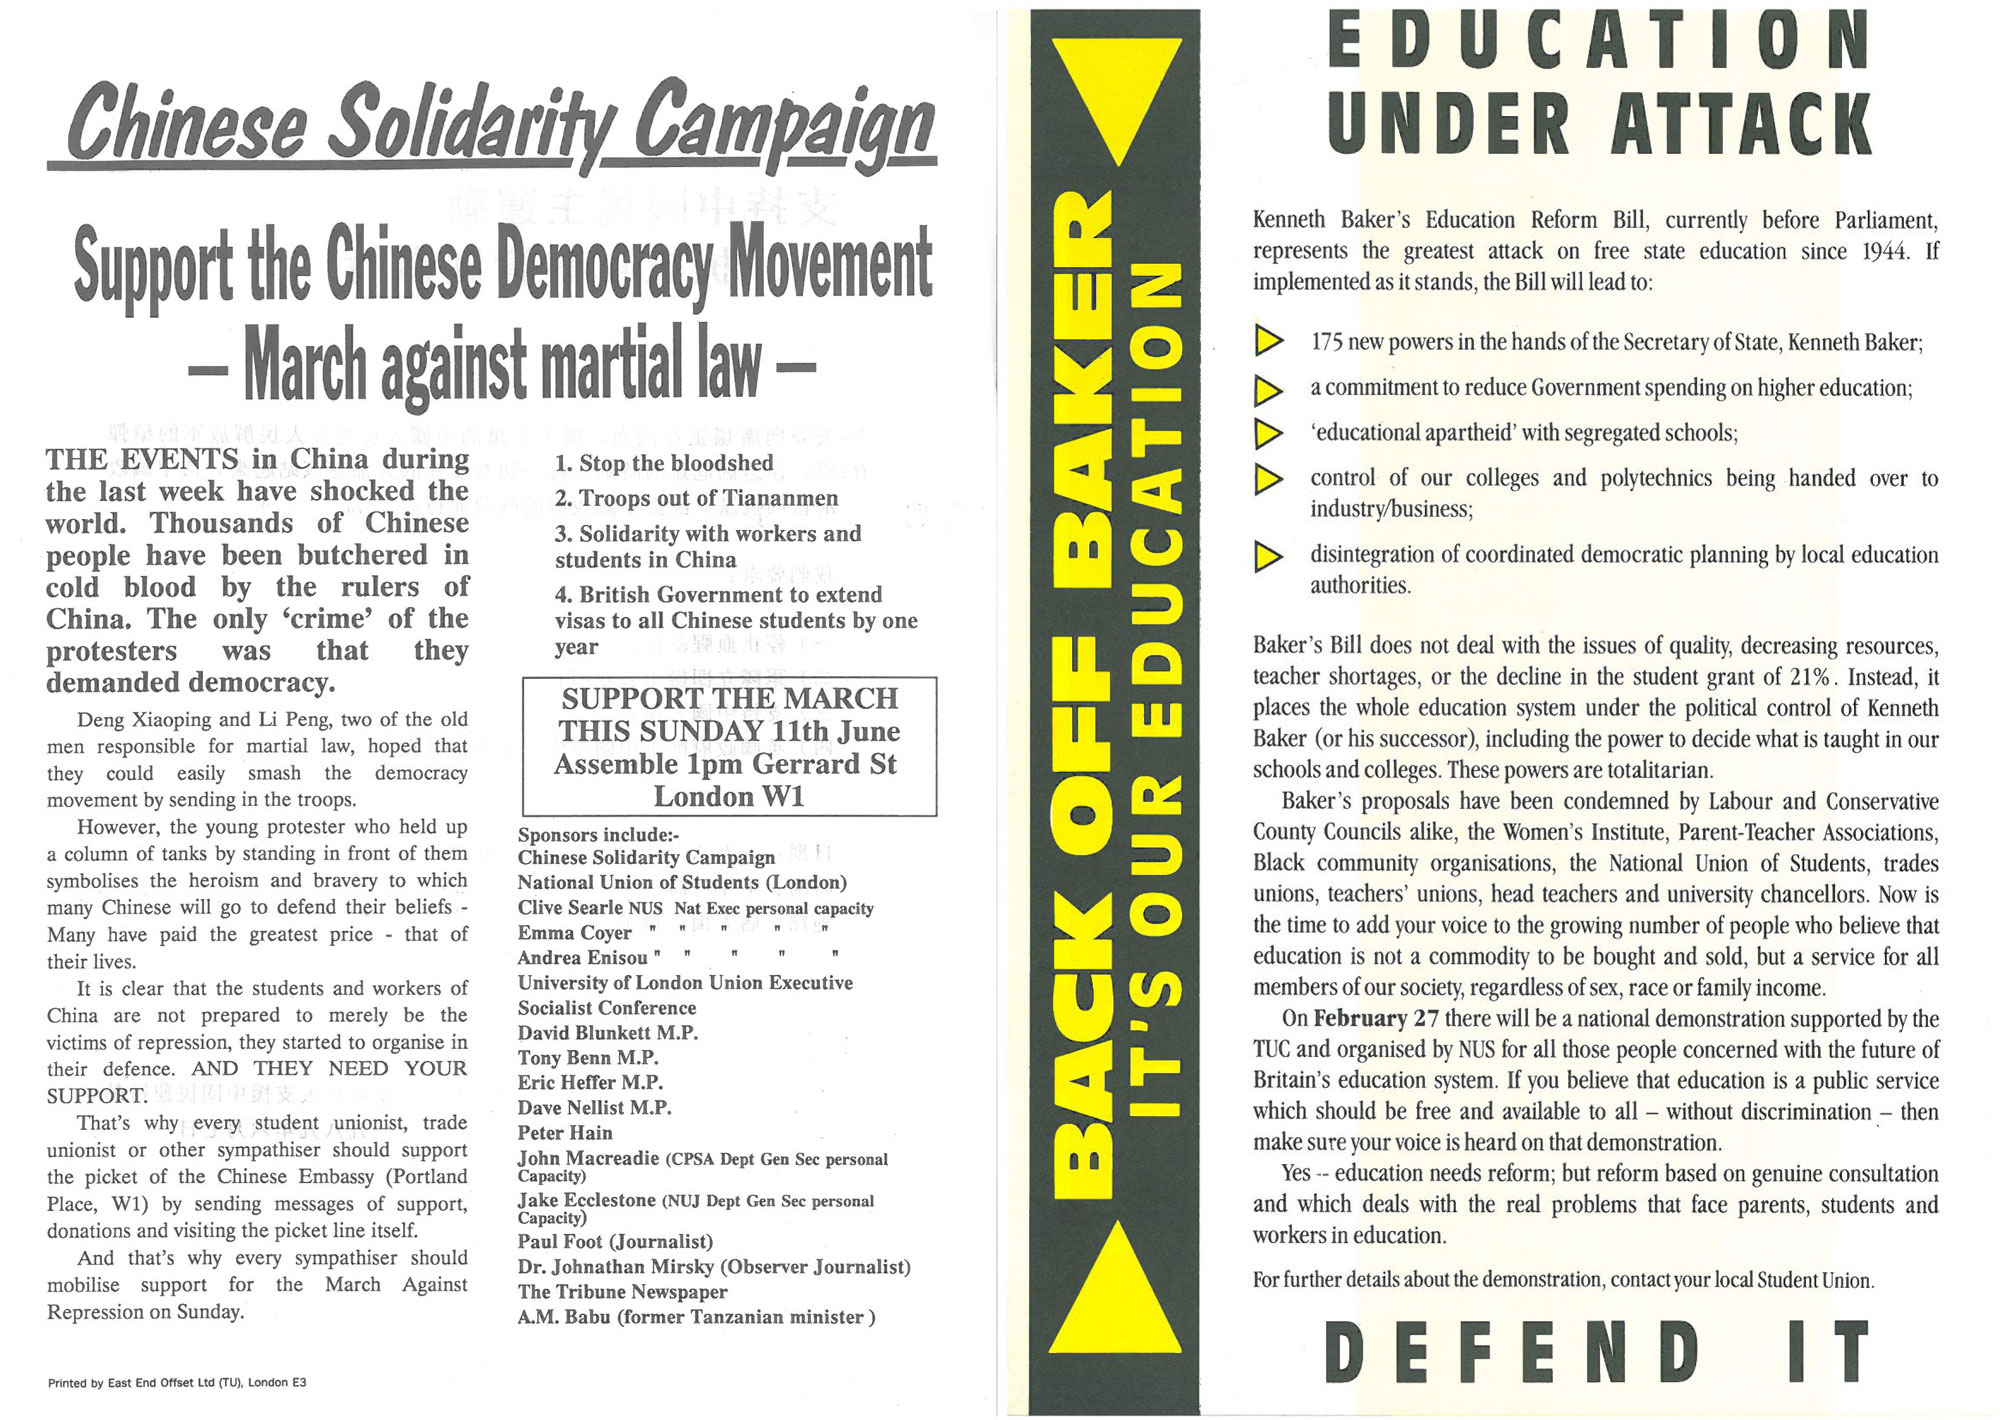 Image - Chinese solidarity campaign 1989